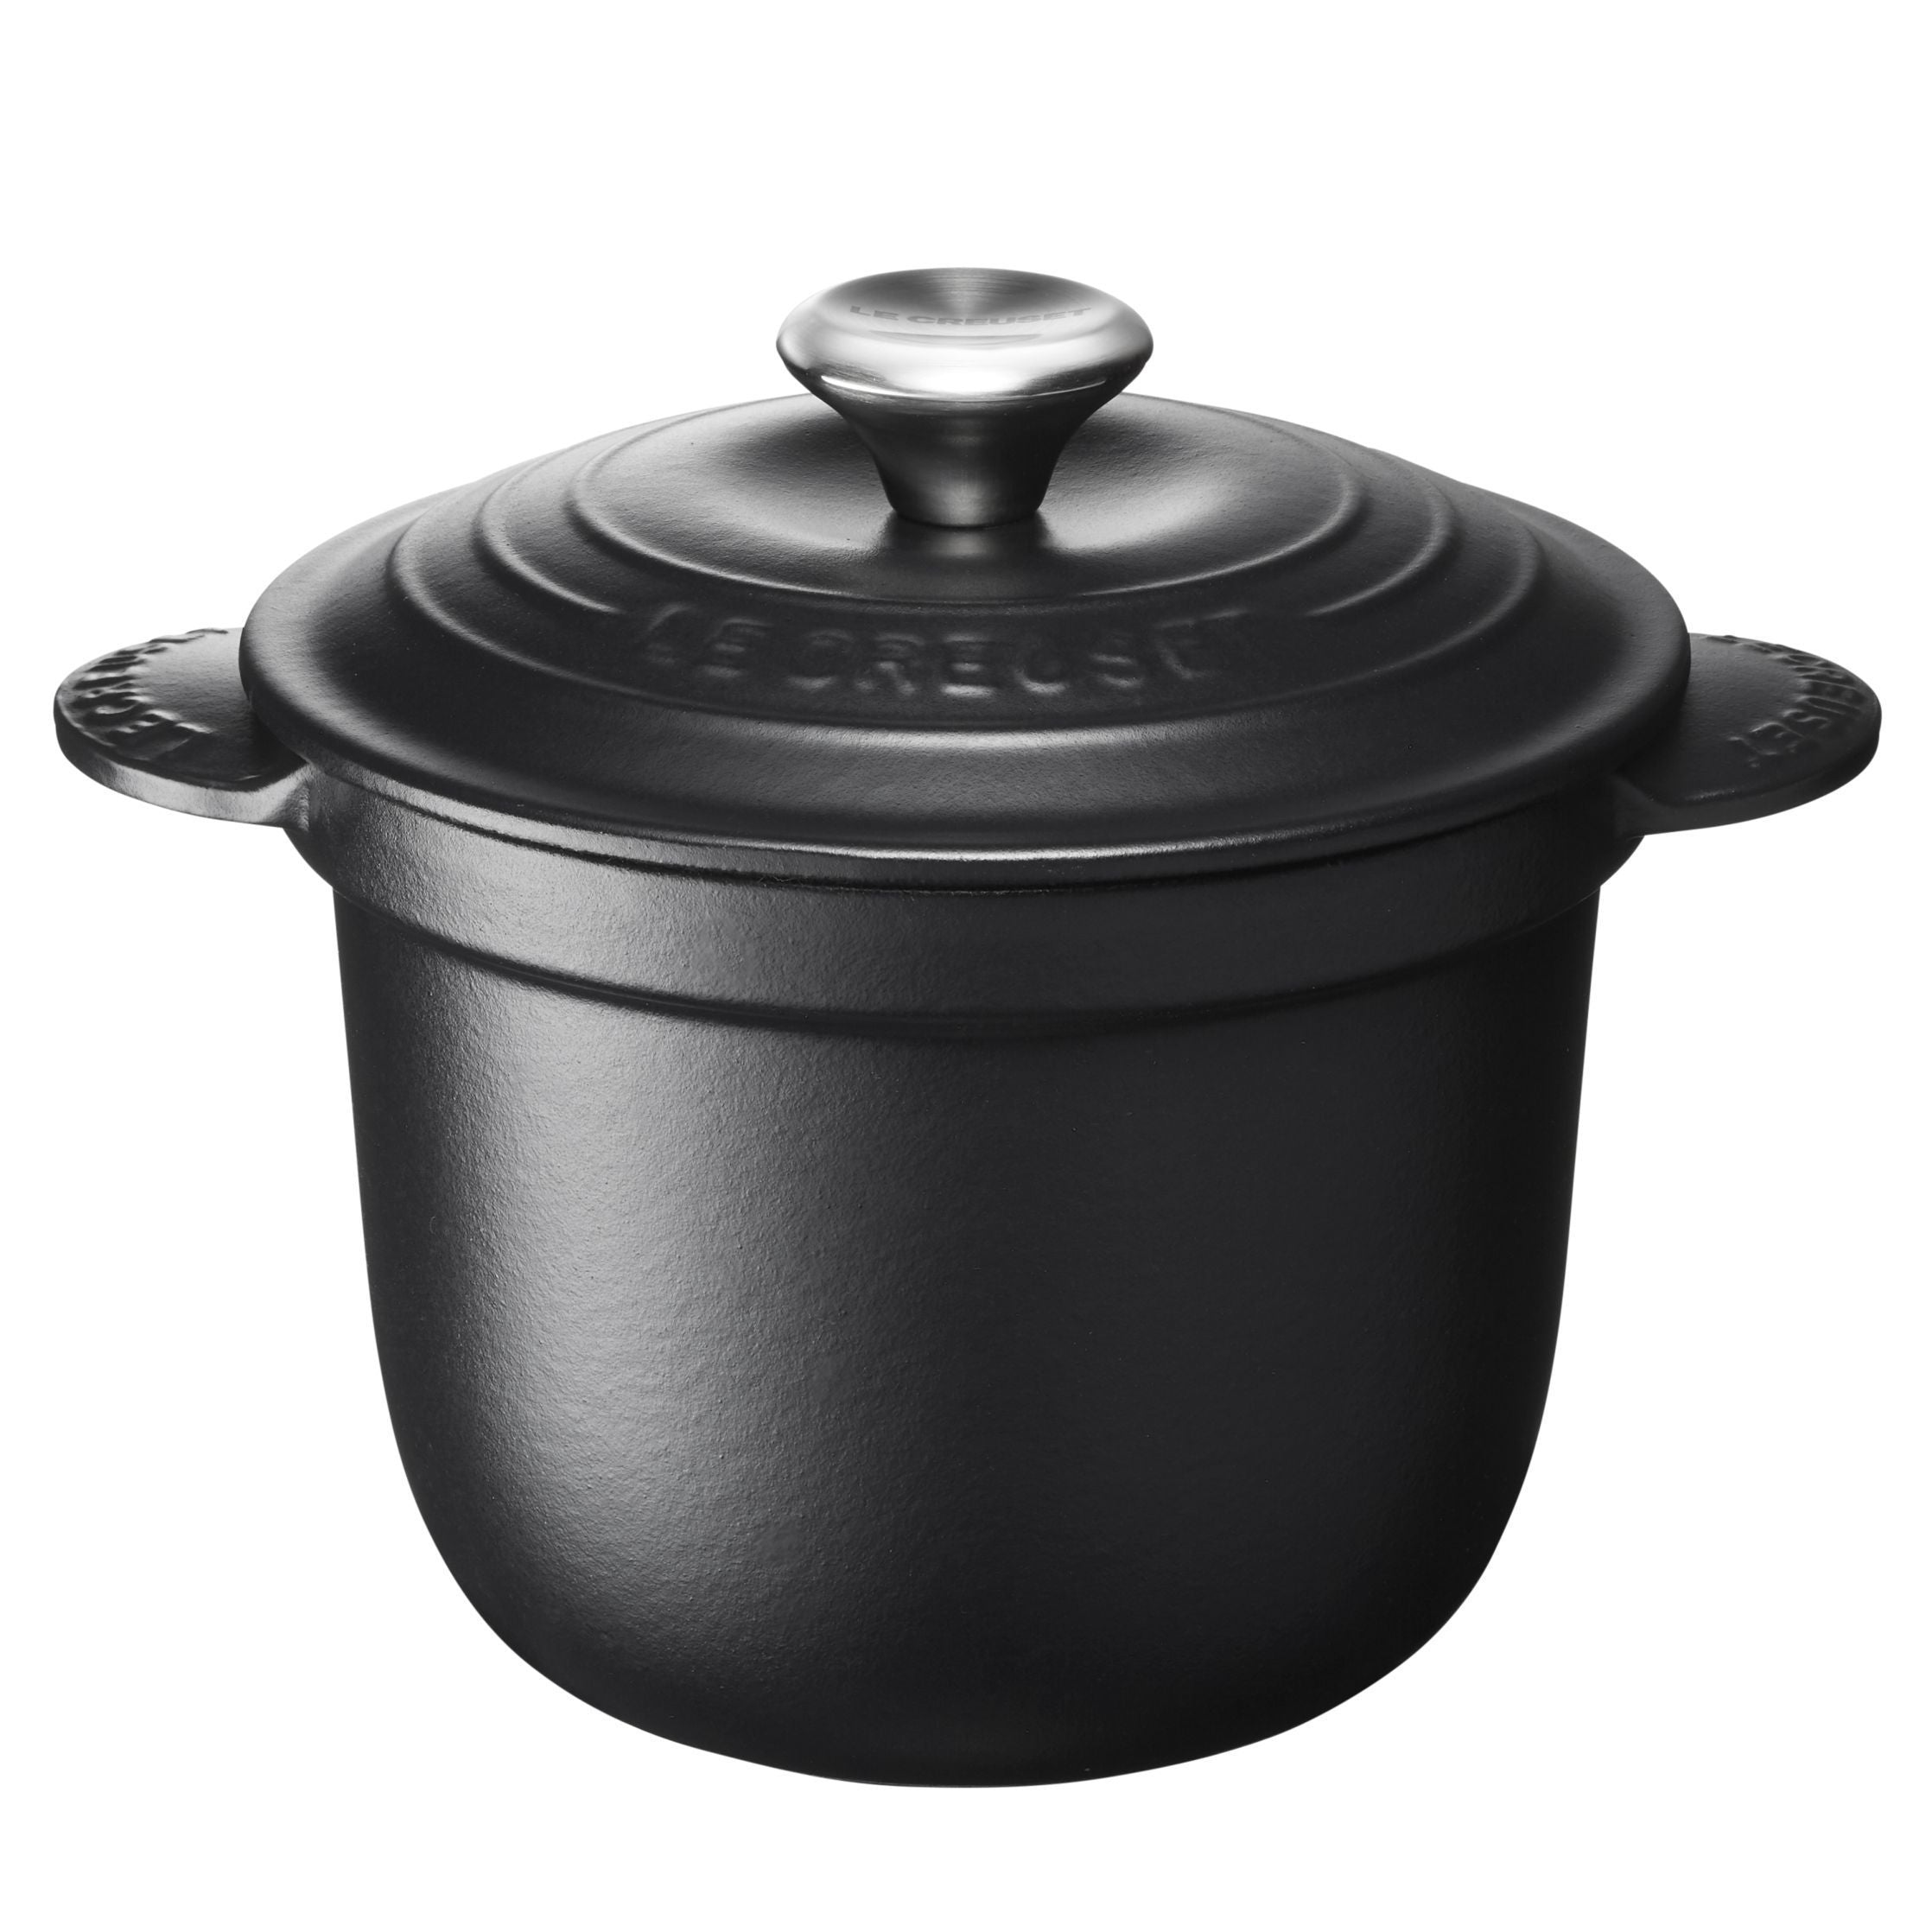 Le Creuset Cocotte Every With Poteriedeckel 18 Cm, Black